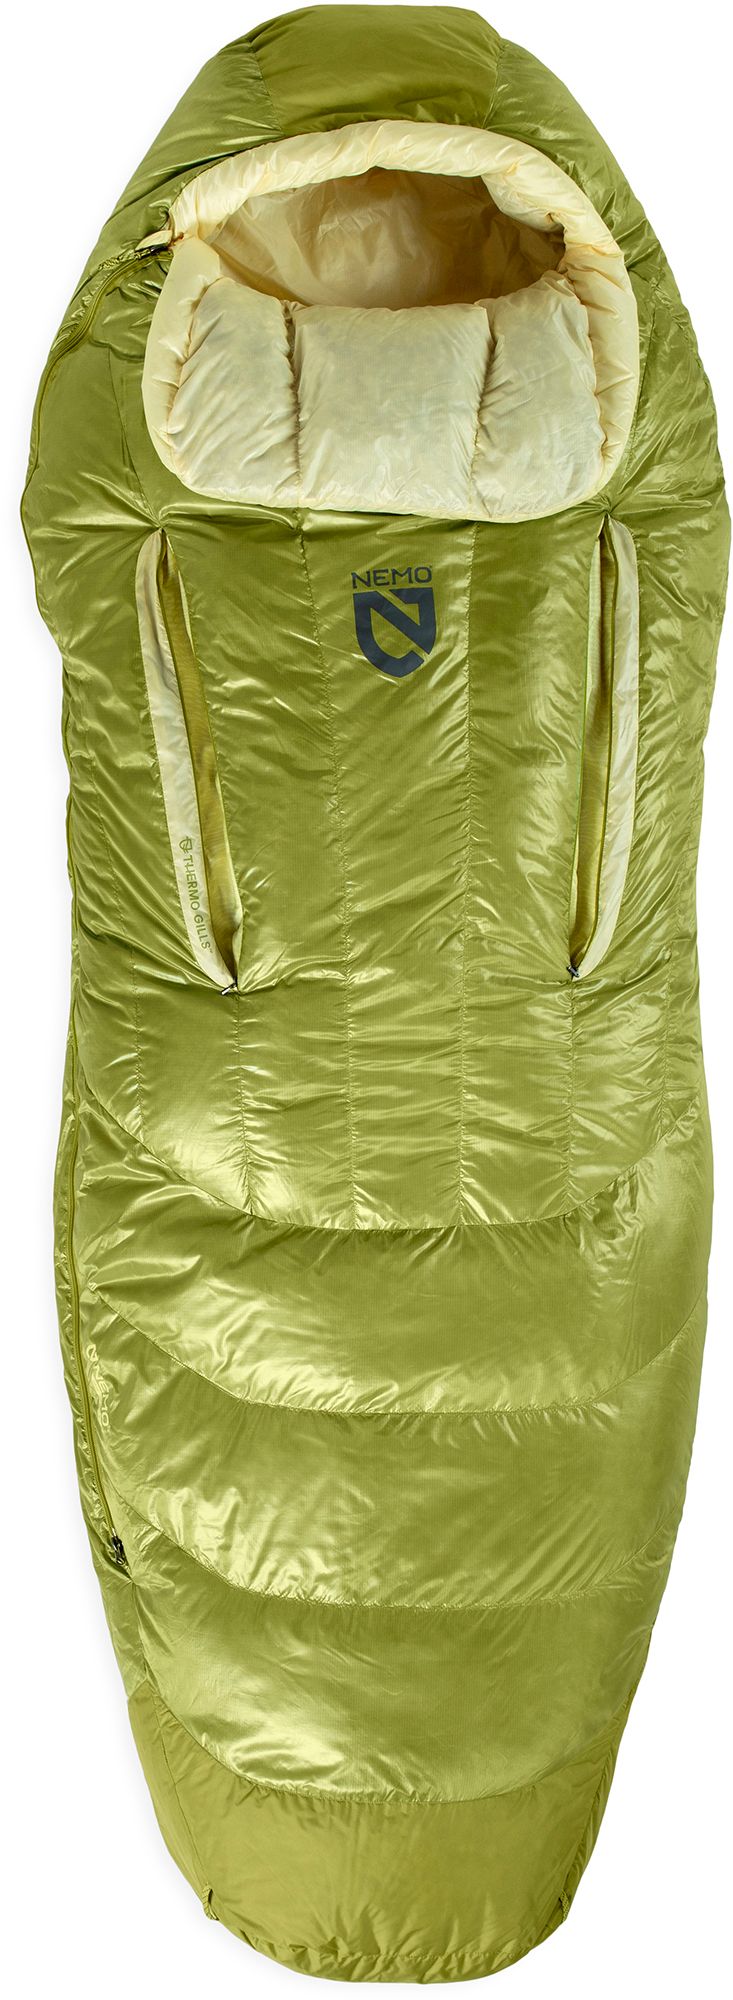 Photos - Suitcase / Backpack Cover Nemo Women's 15 Endless Promise Down Sleeping Bag, Regular, Birch Bud 24VY 